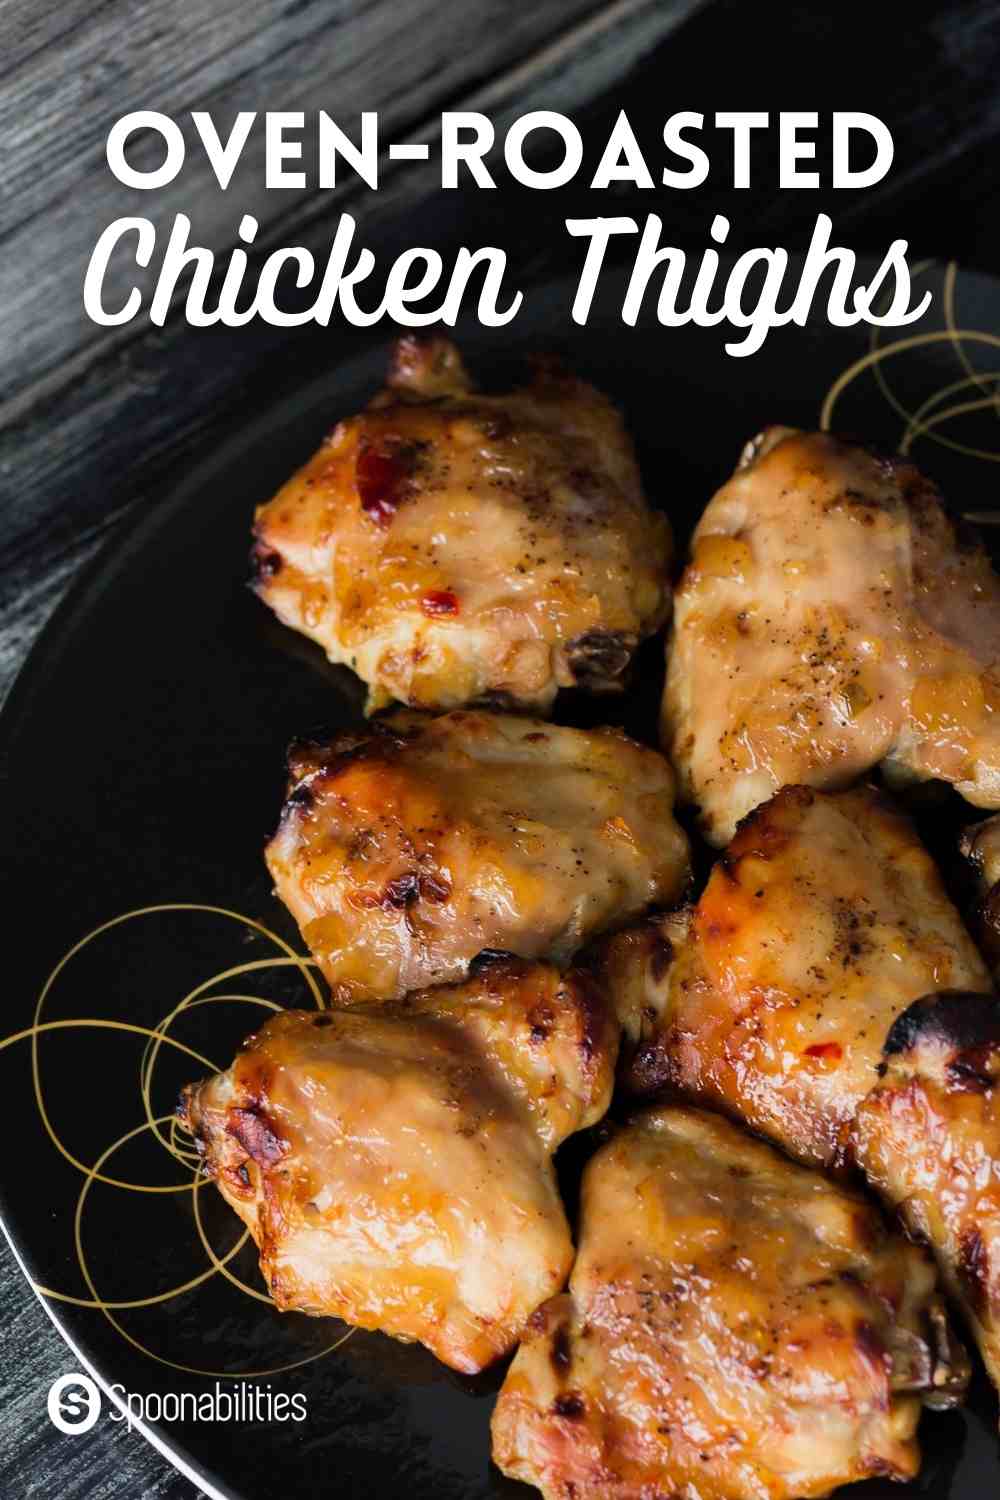 Oven-roasted chicken thighs with roasted pineapple & habanero sauce